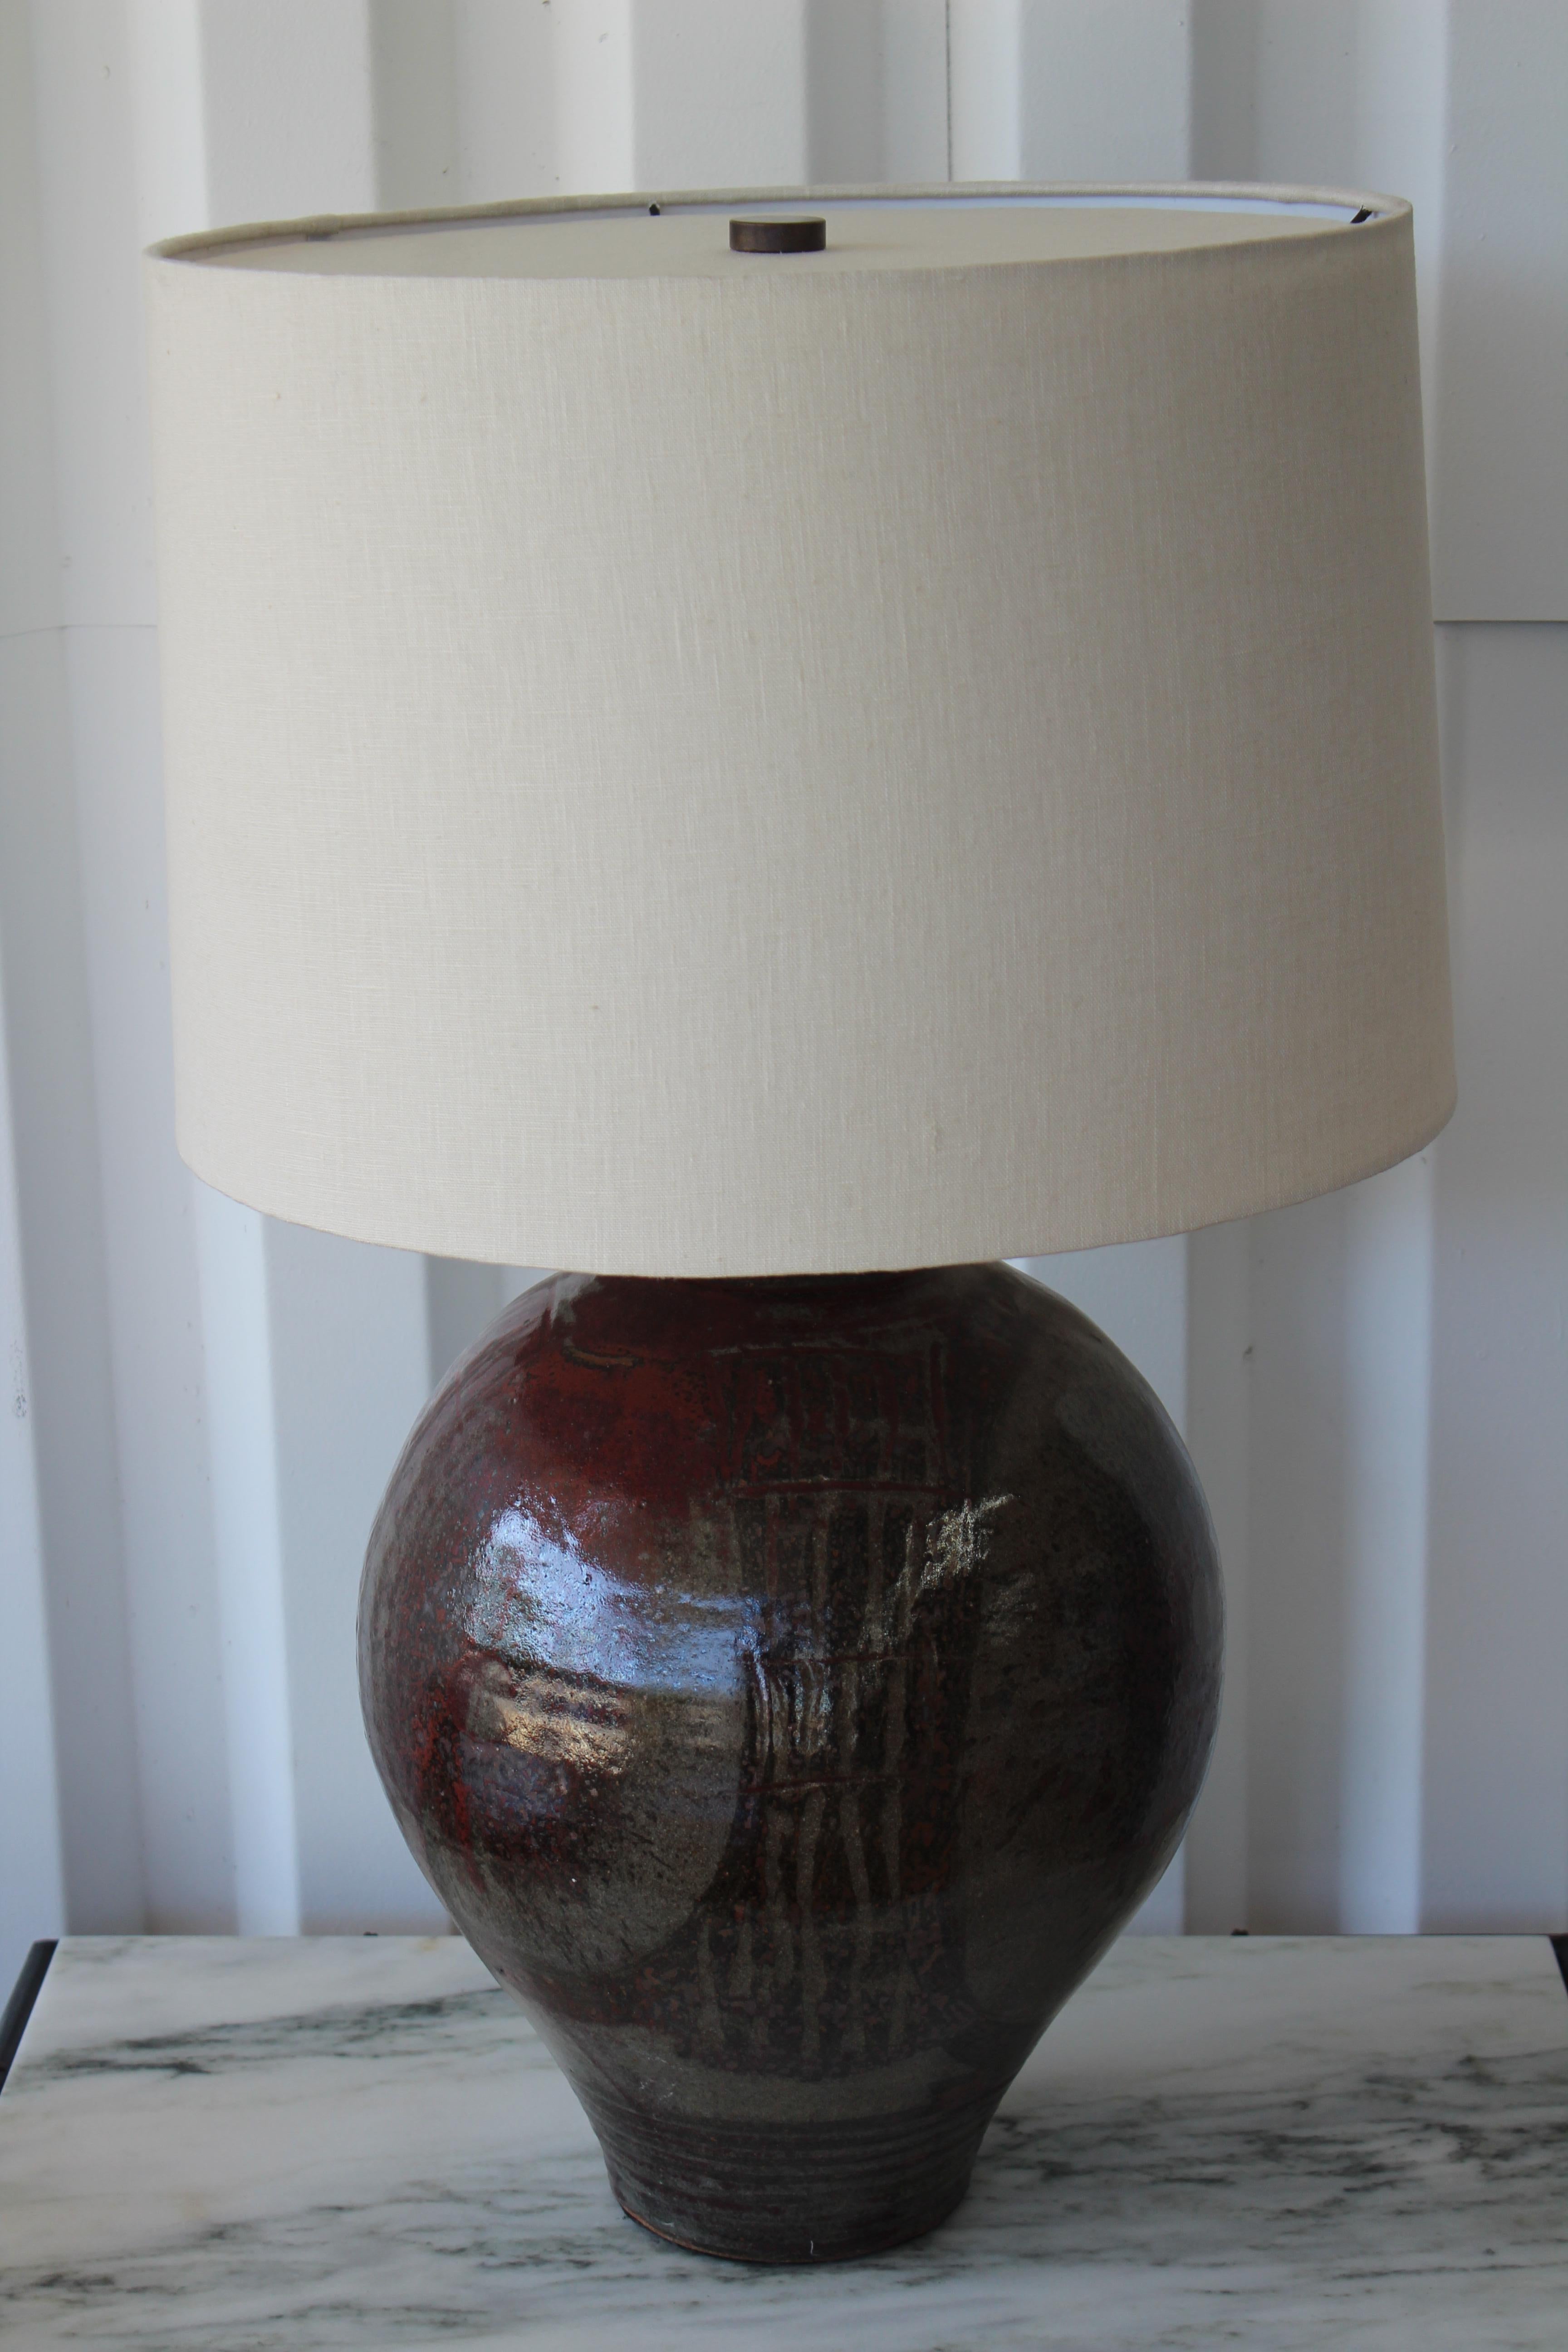 Vintage 1960s studio pottery lamp. Glossy glaze with hues of red. Newly rewired and fitted with a custom linen shade. 
28 H with shade, 13 inches at widest point of the base. Lamp shade is 16